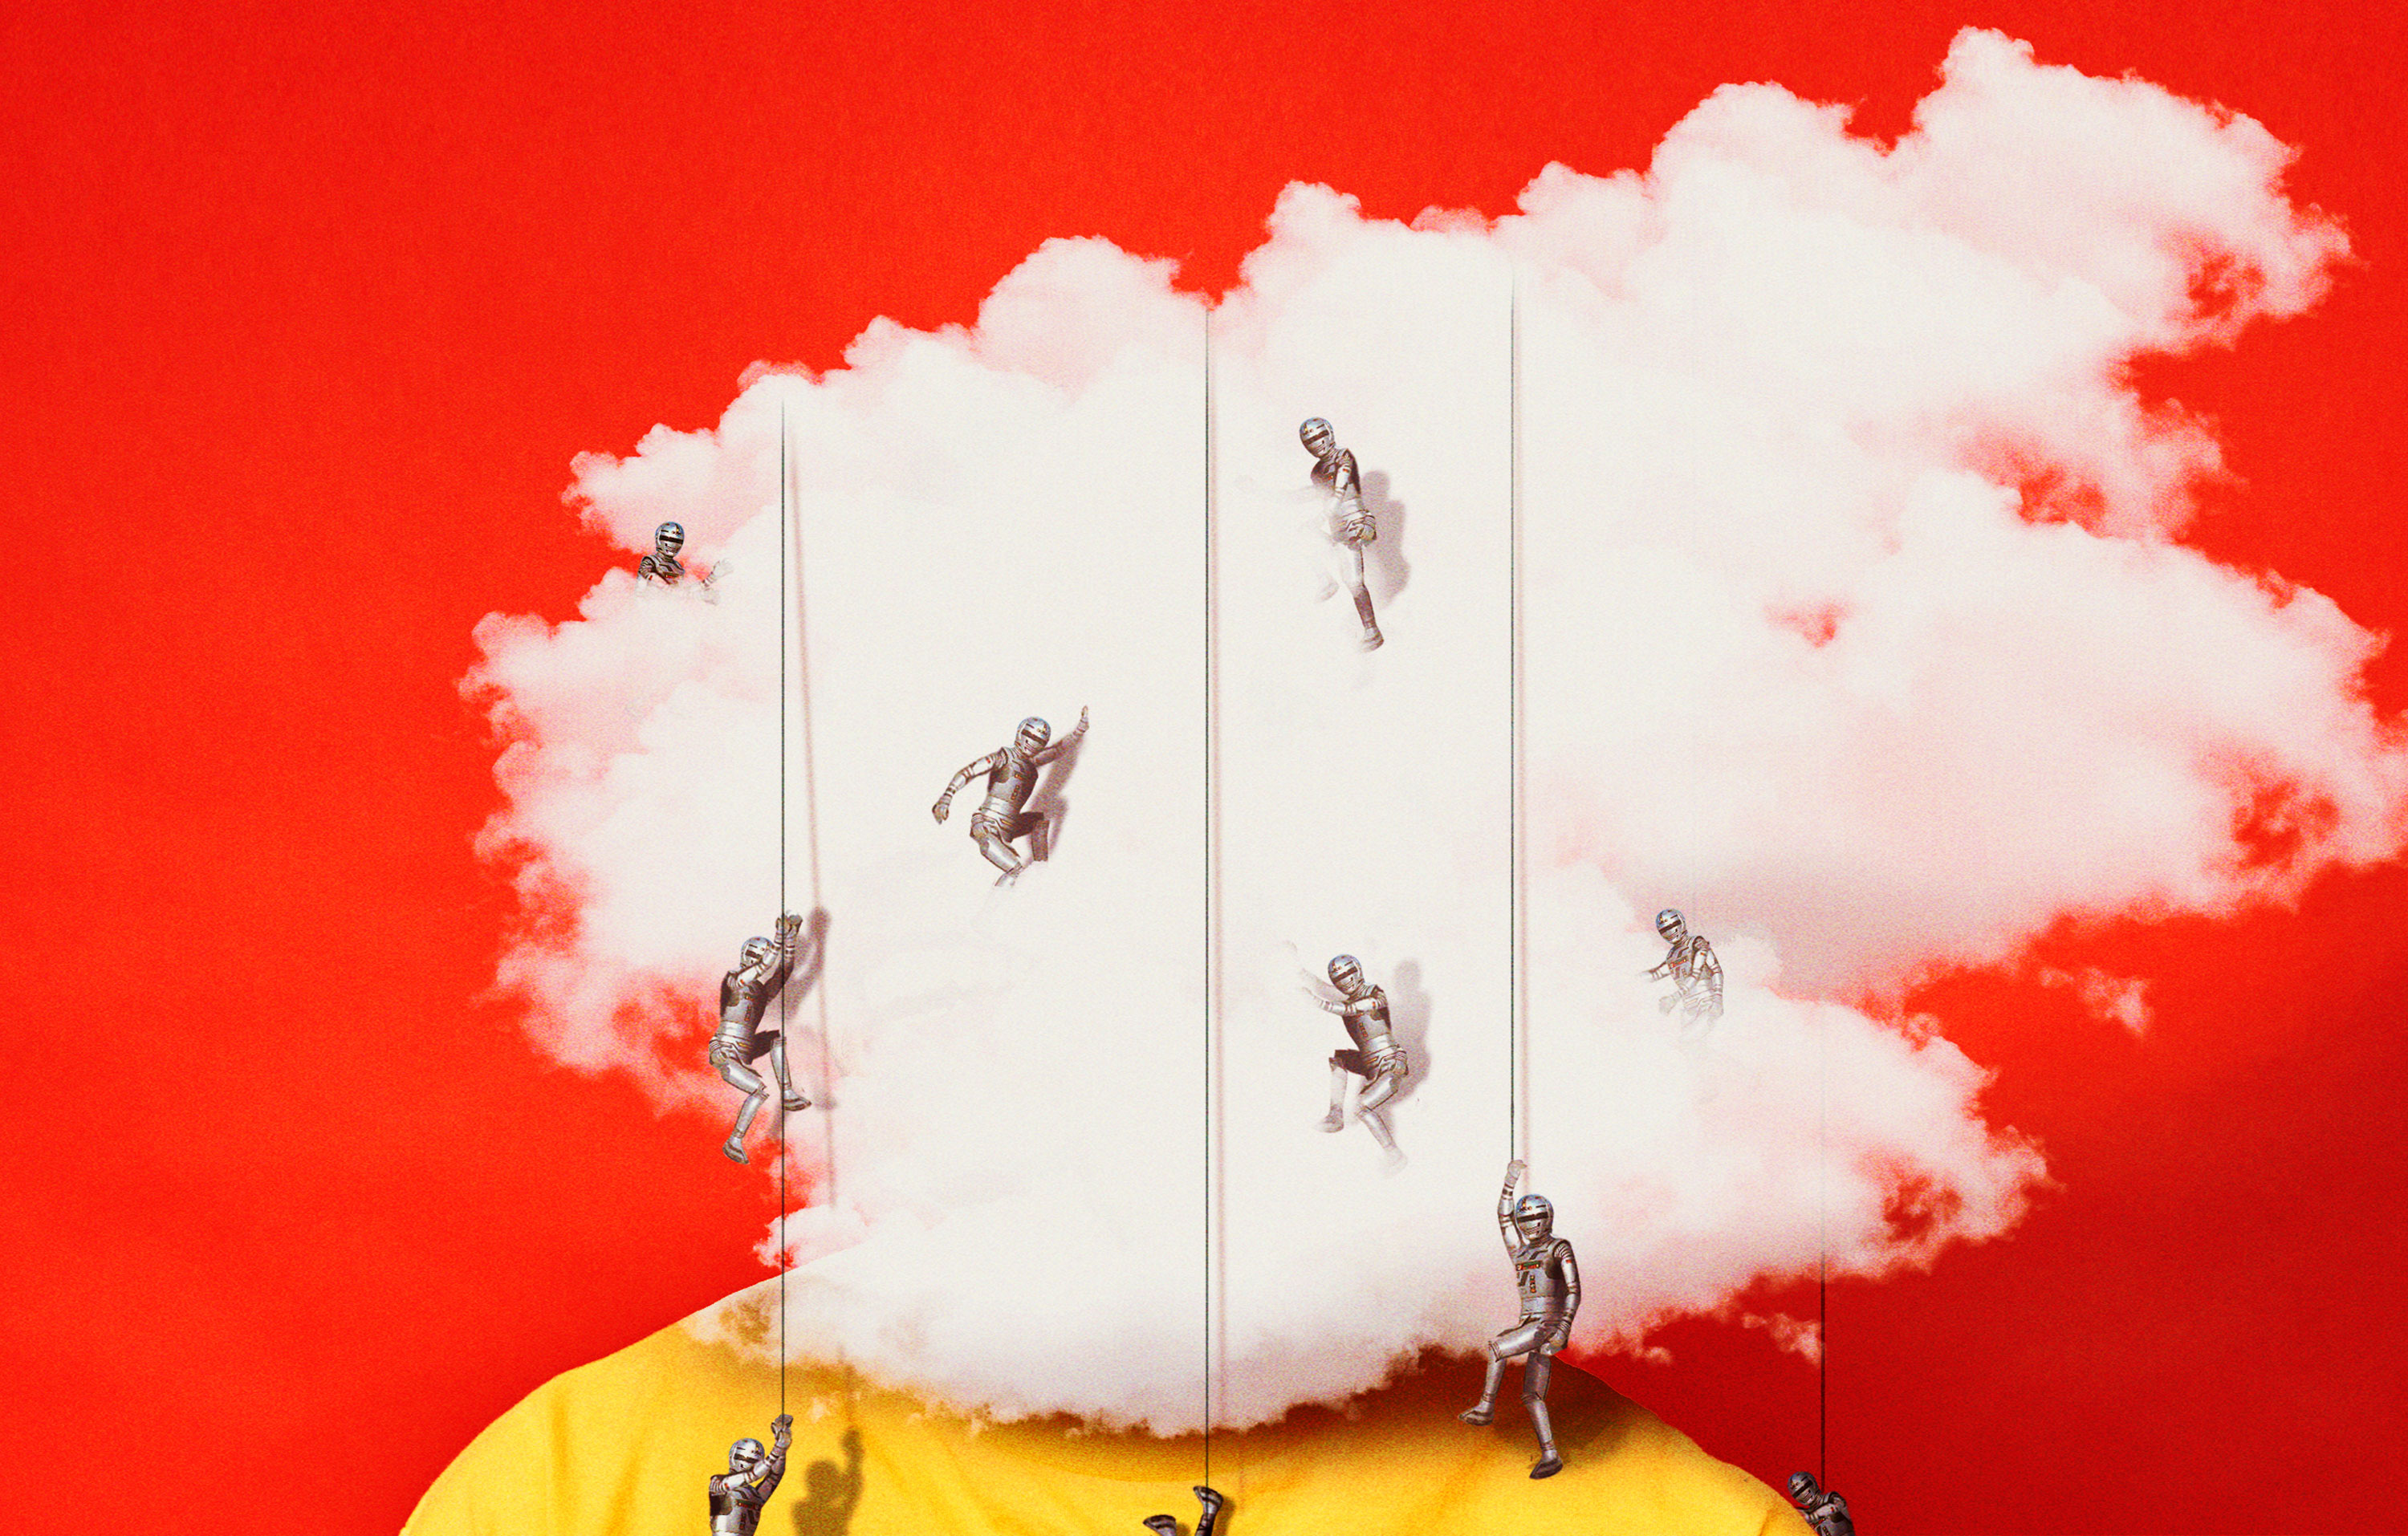 Conceptual illustration showing a person whose face is obscured by a cloud with small soldiers rappelling over it.